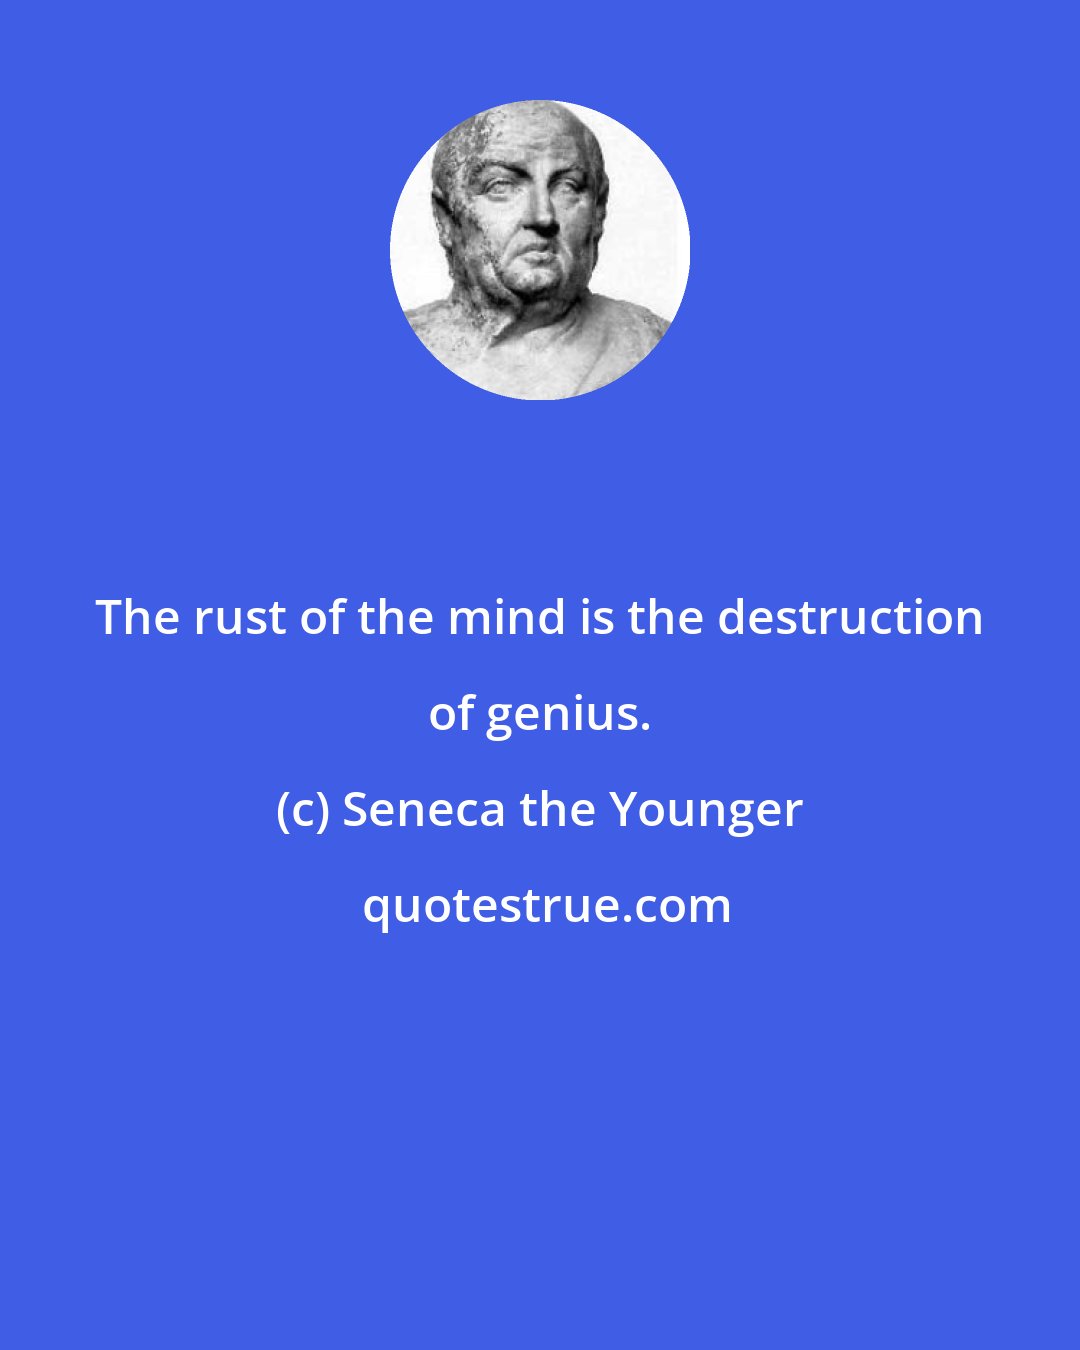 Seneca the Younger: The rust of the mind is the destruction of genius.